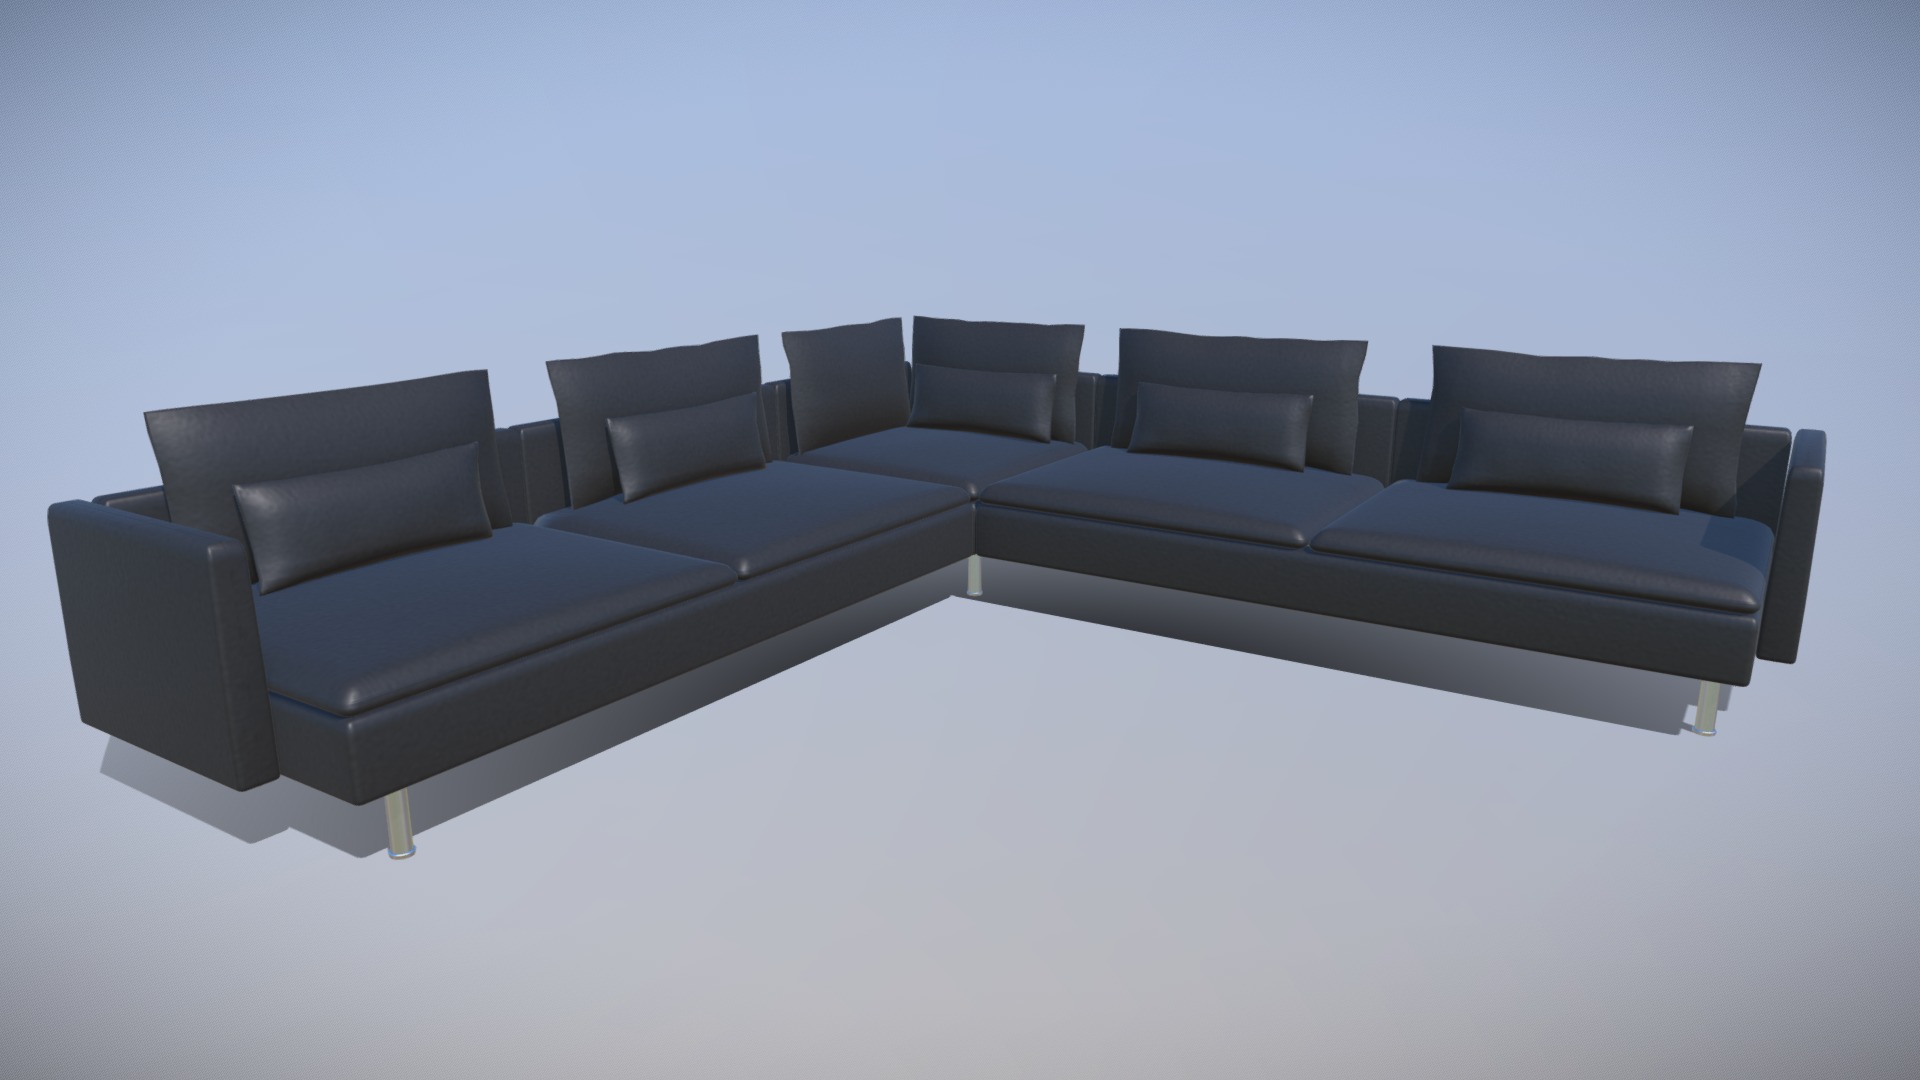 3D model Black Leather Sofa VR AR low poly Low-poly - This is a 3D model of the Black Leather Sofa VR AR low poly Low-poly. The 3D model is about a couch with a cushion.